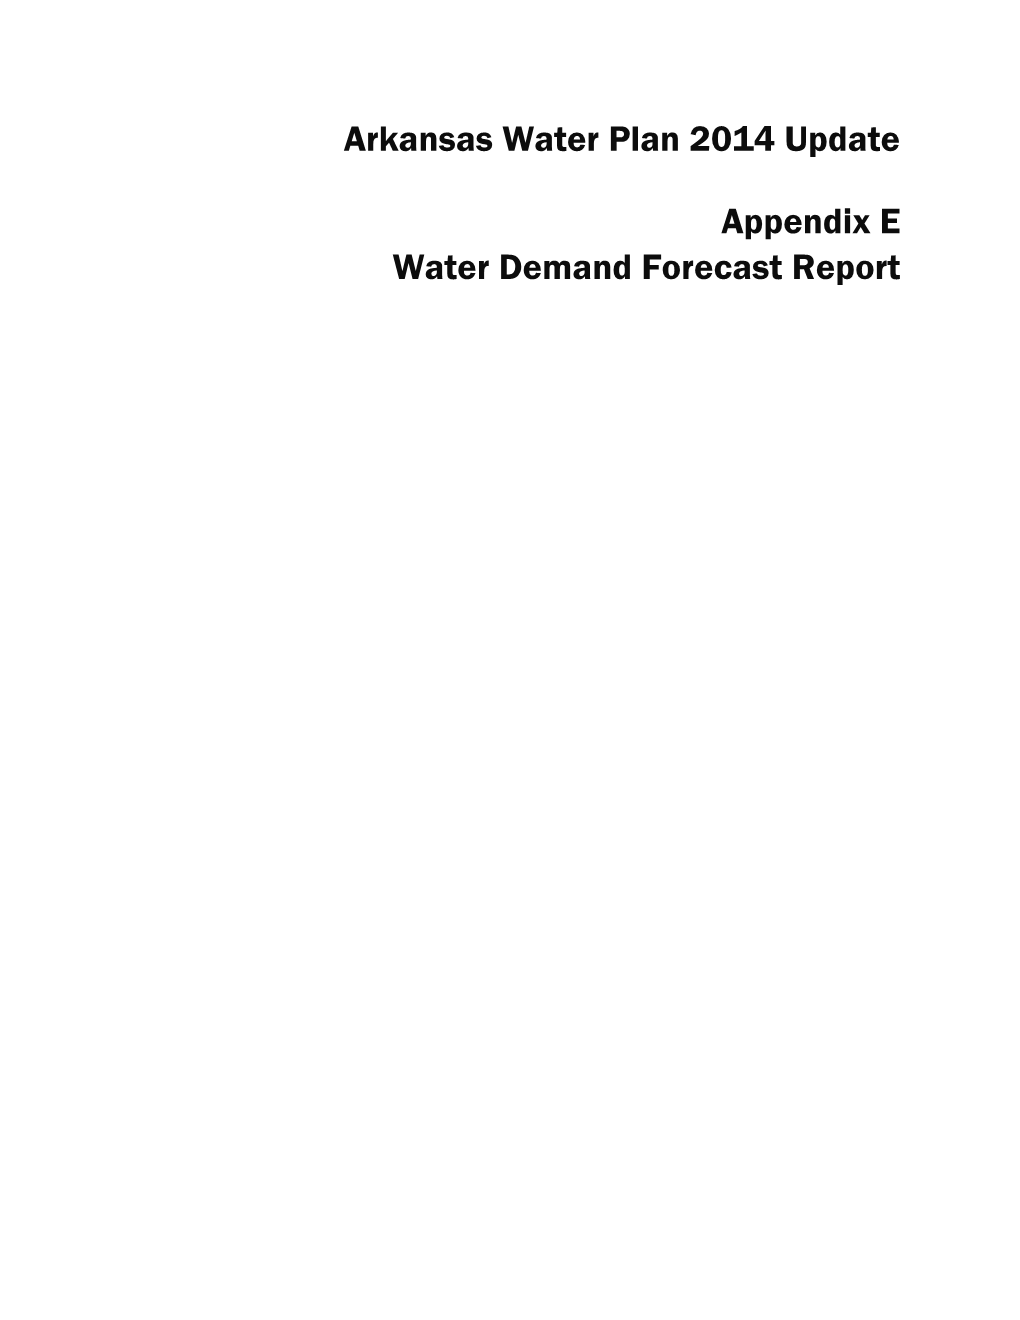 Water Demand Forecast Report